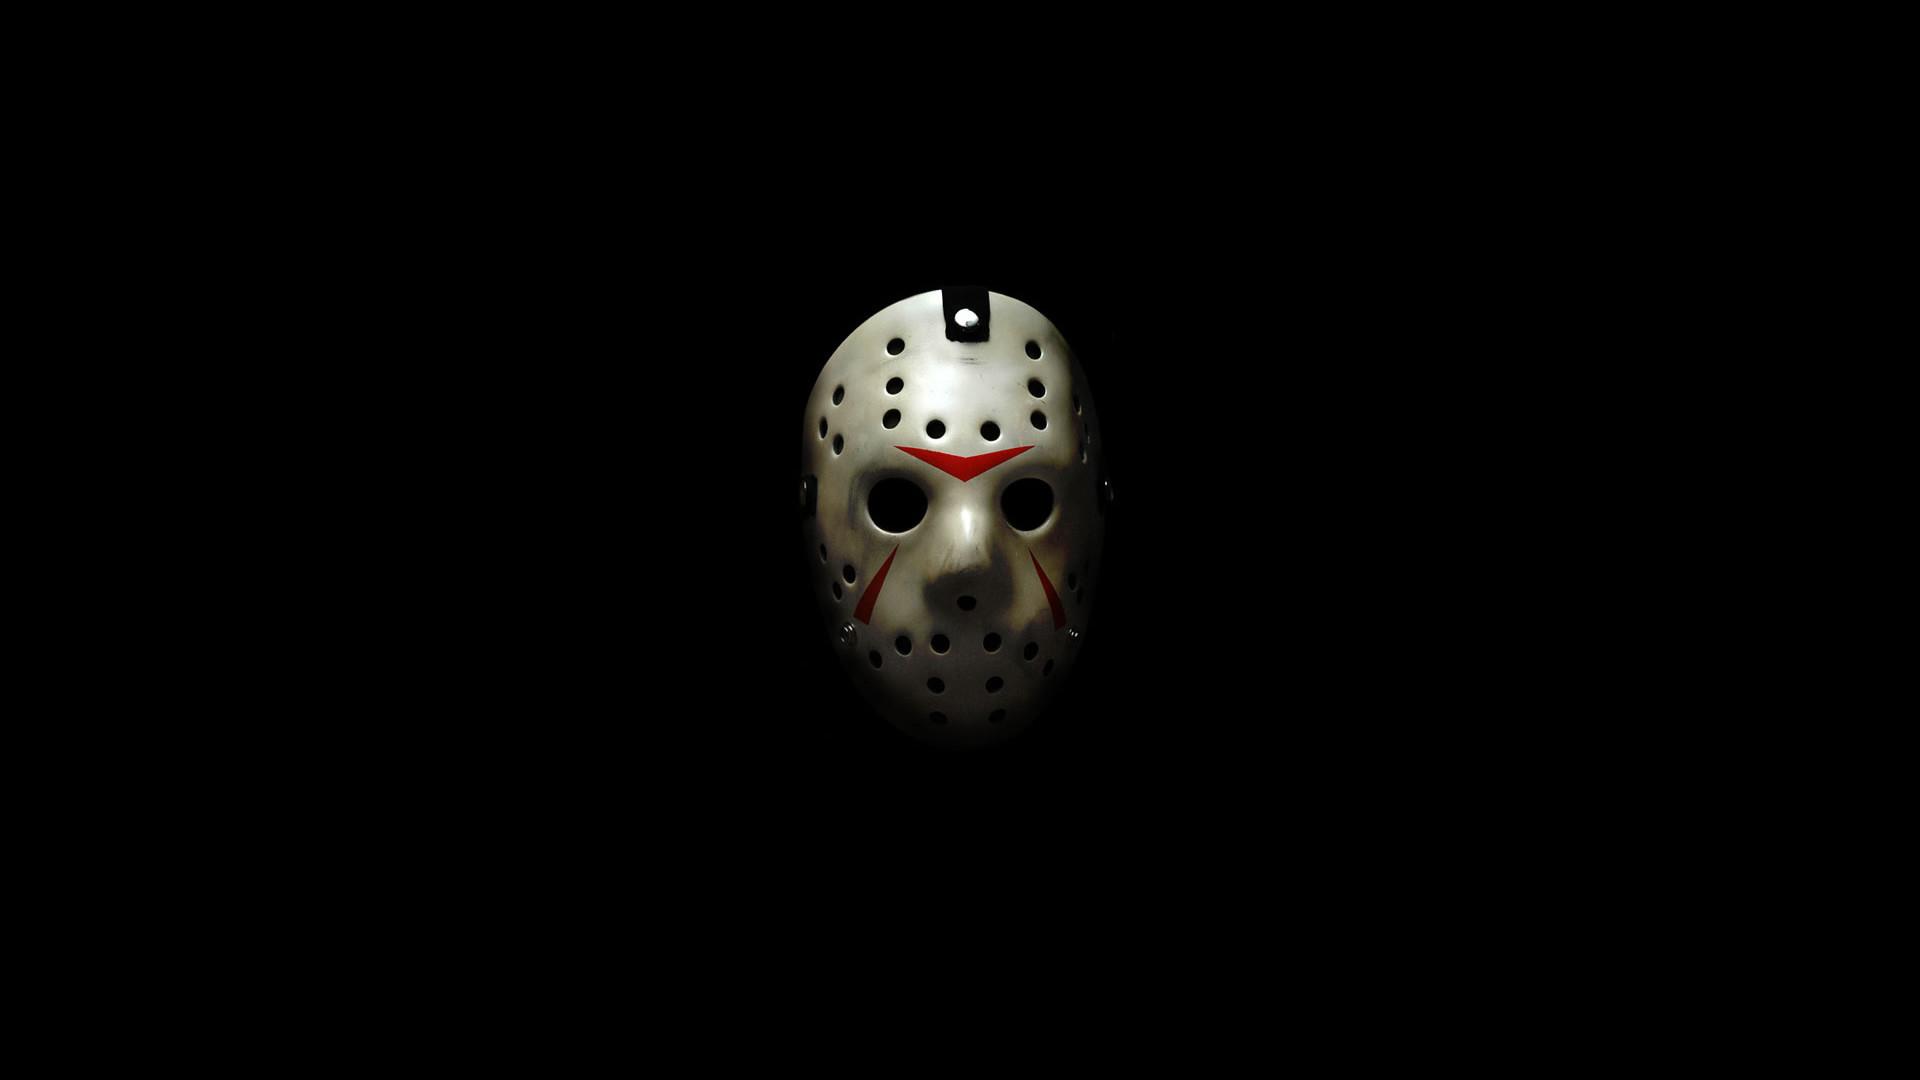 Jason Voorhees Friday the 13th Wallpaper